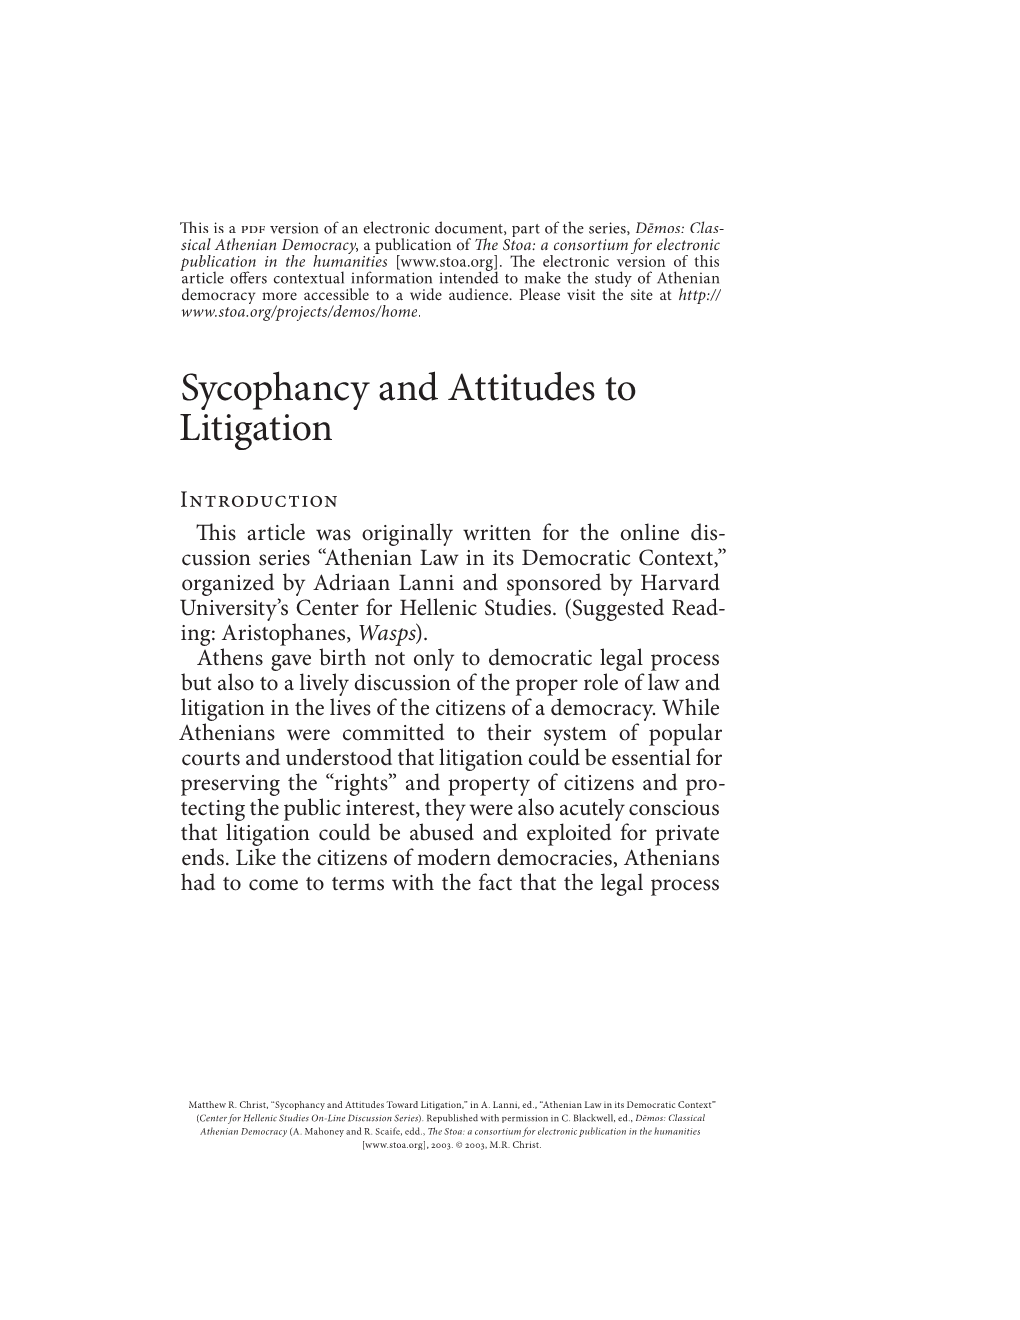 Sycophancy and Attitudes to Litigation